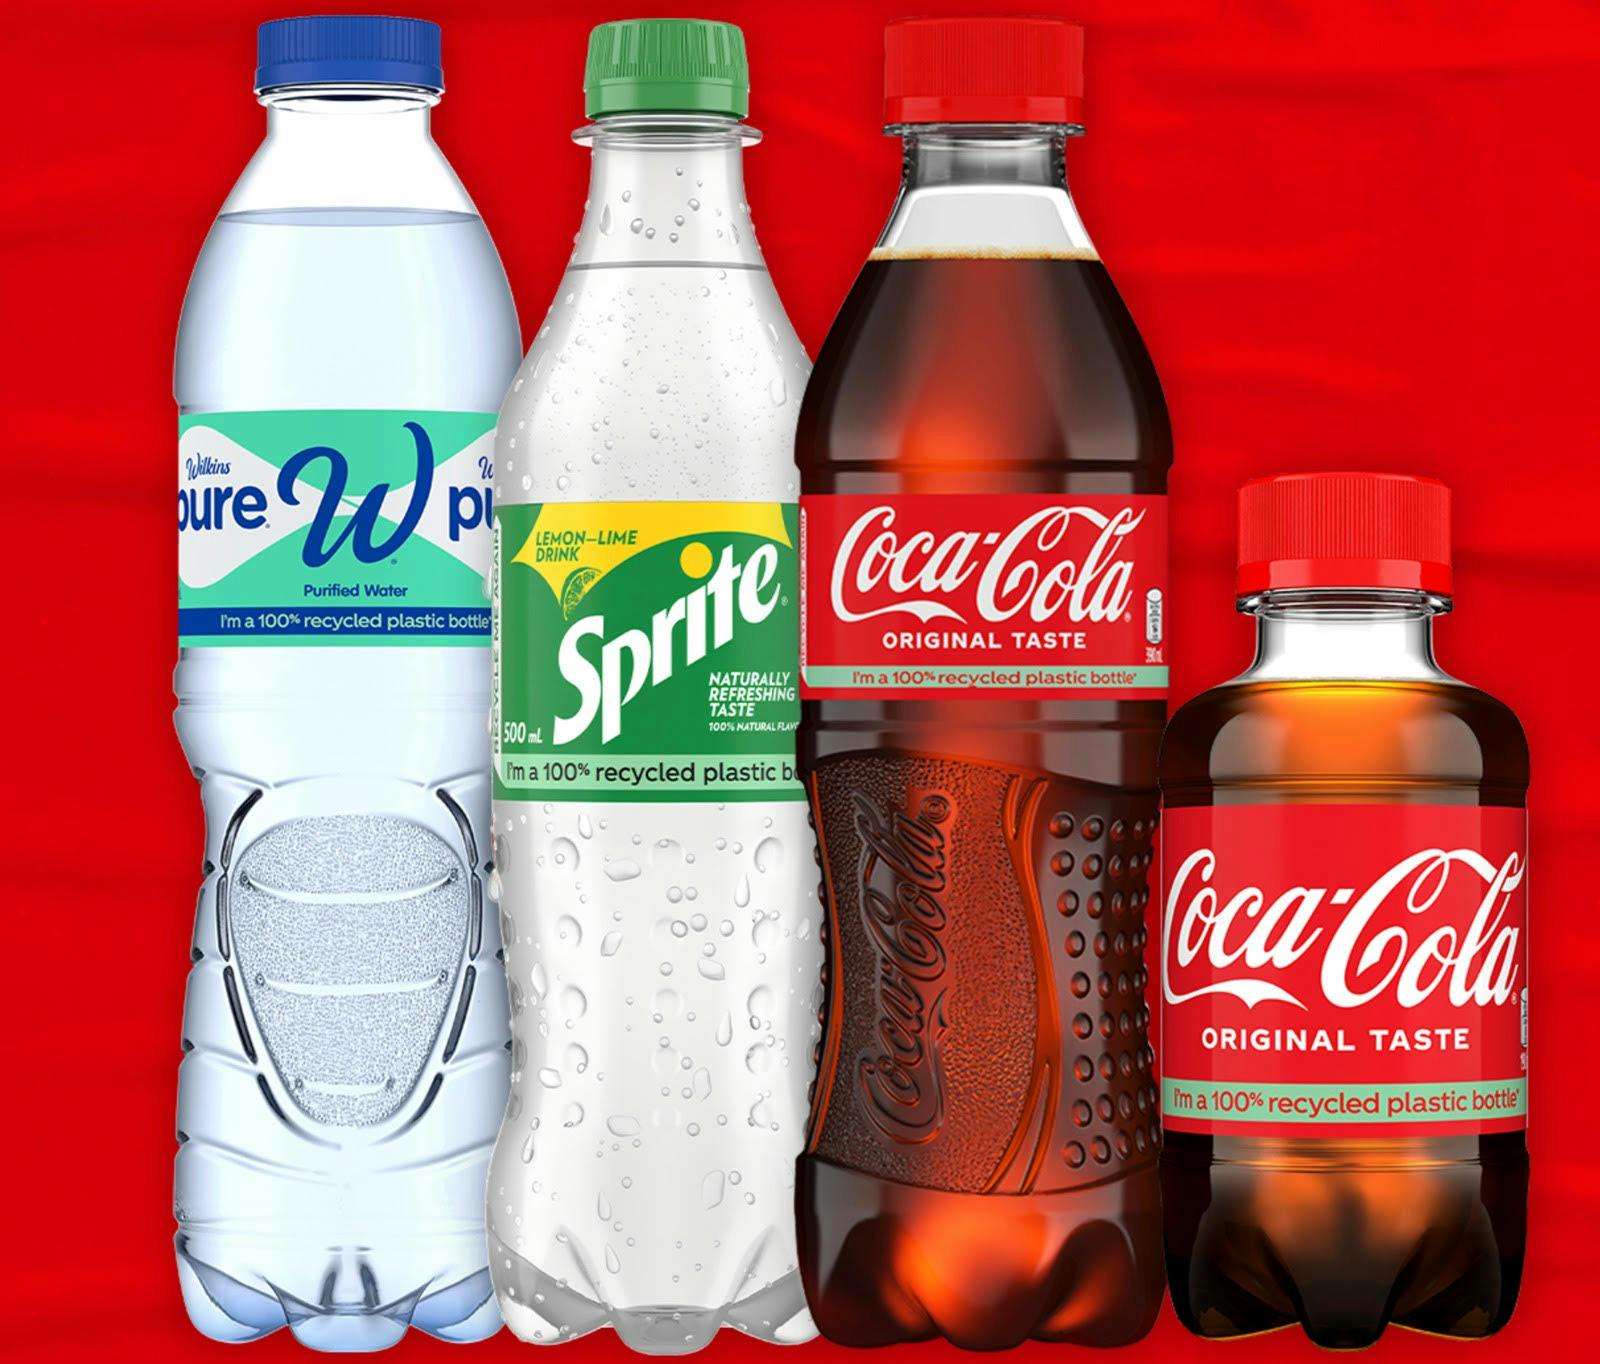 Coca-Cola Phl Expands Recycled Packaging Program, Sustainability Initiatives